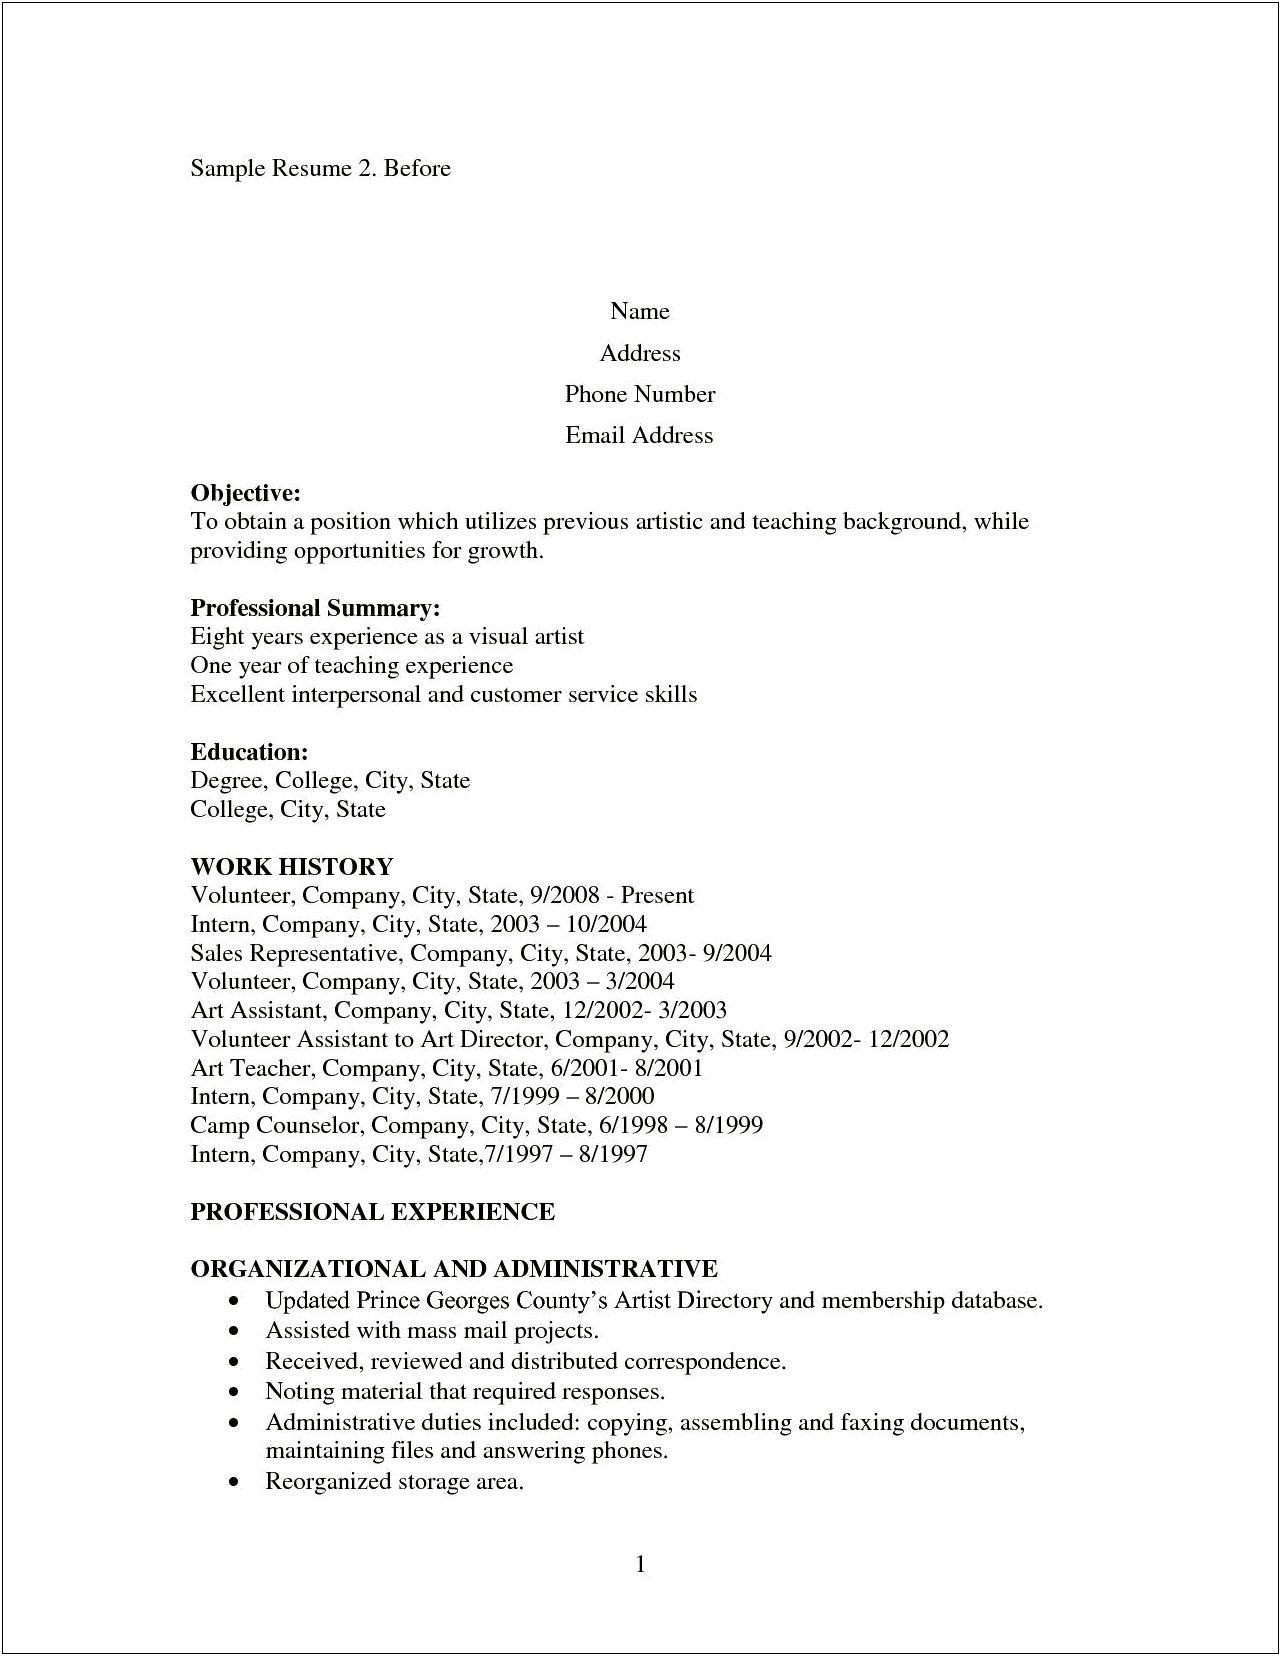 Sample Resume For A Mom Returning To Work